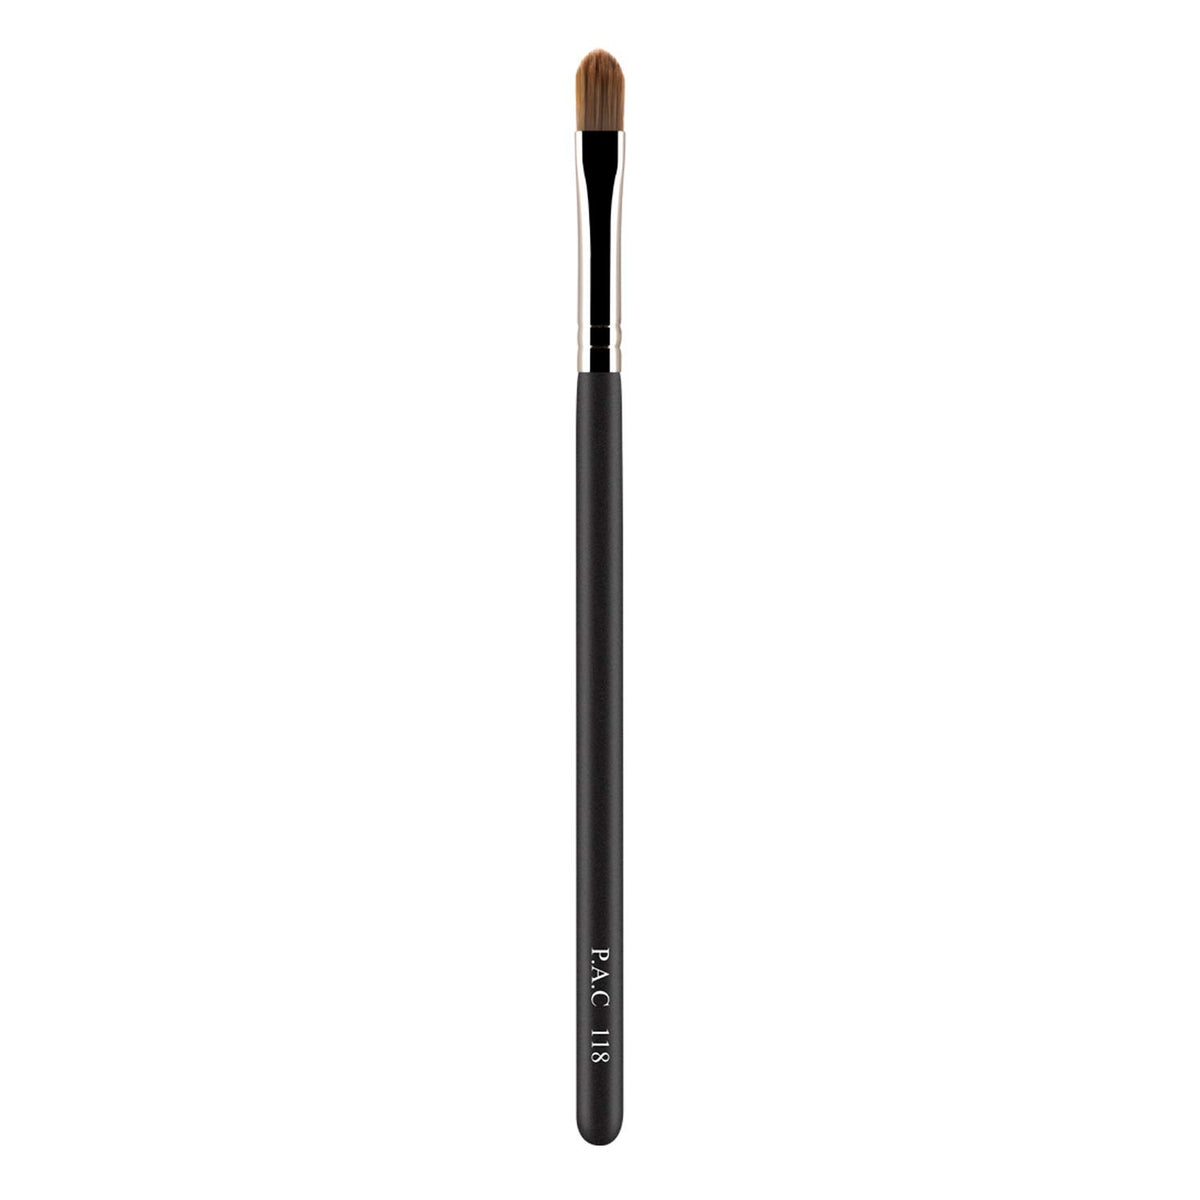 PAC Concealer Brush 118 PAC